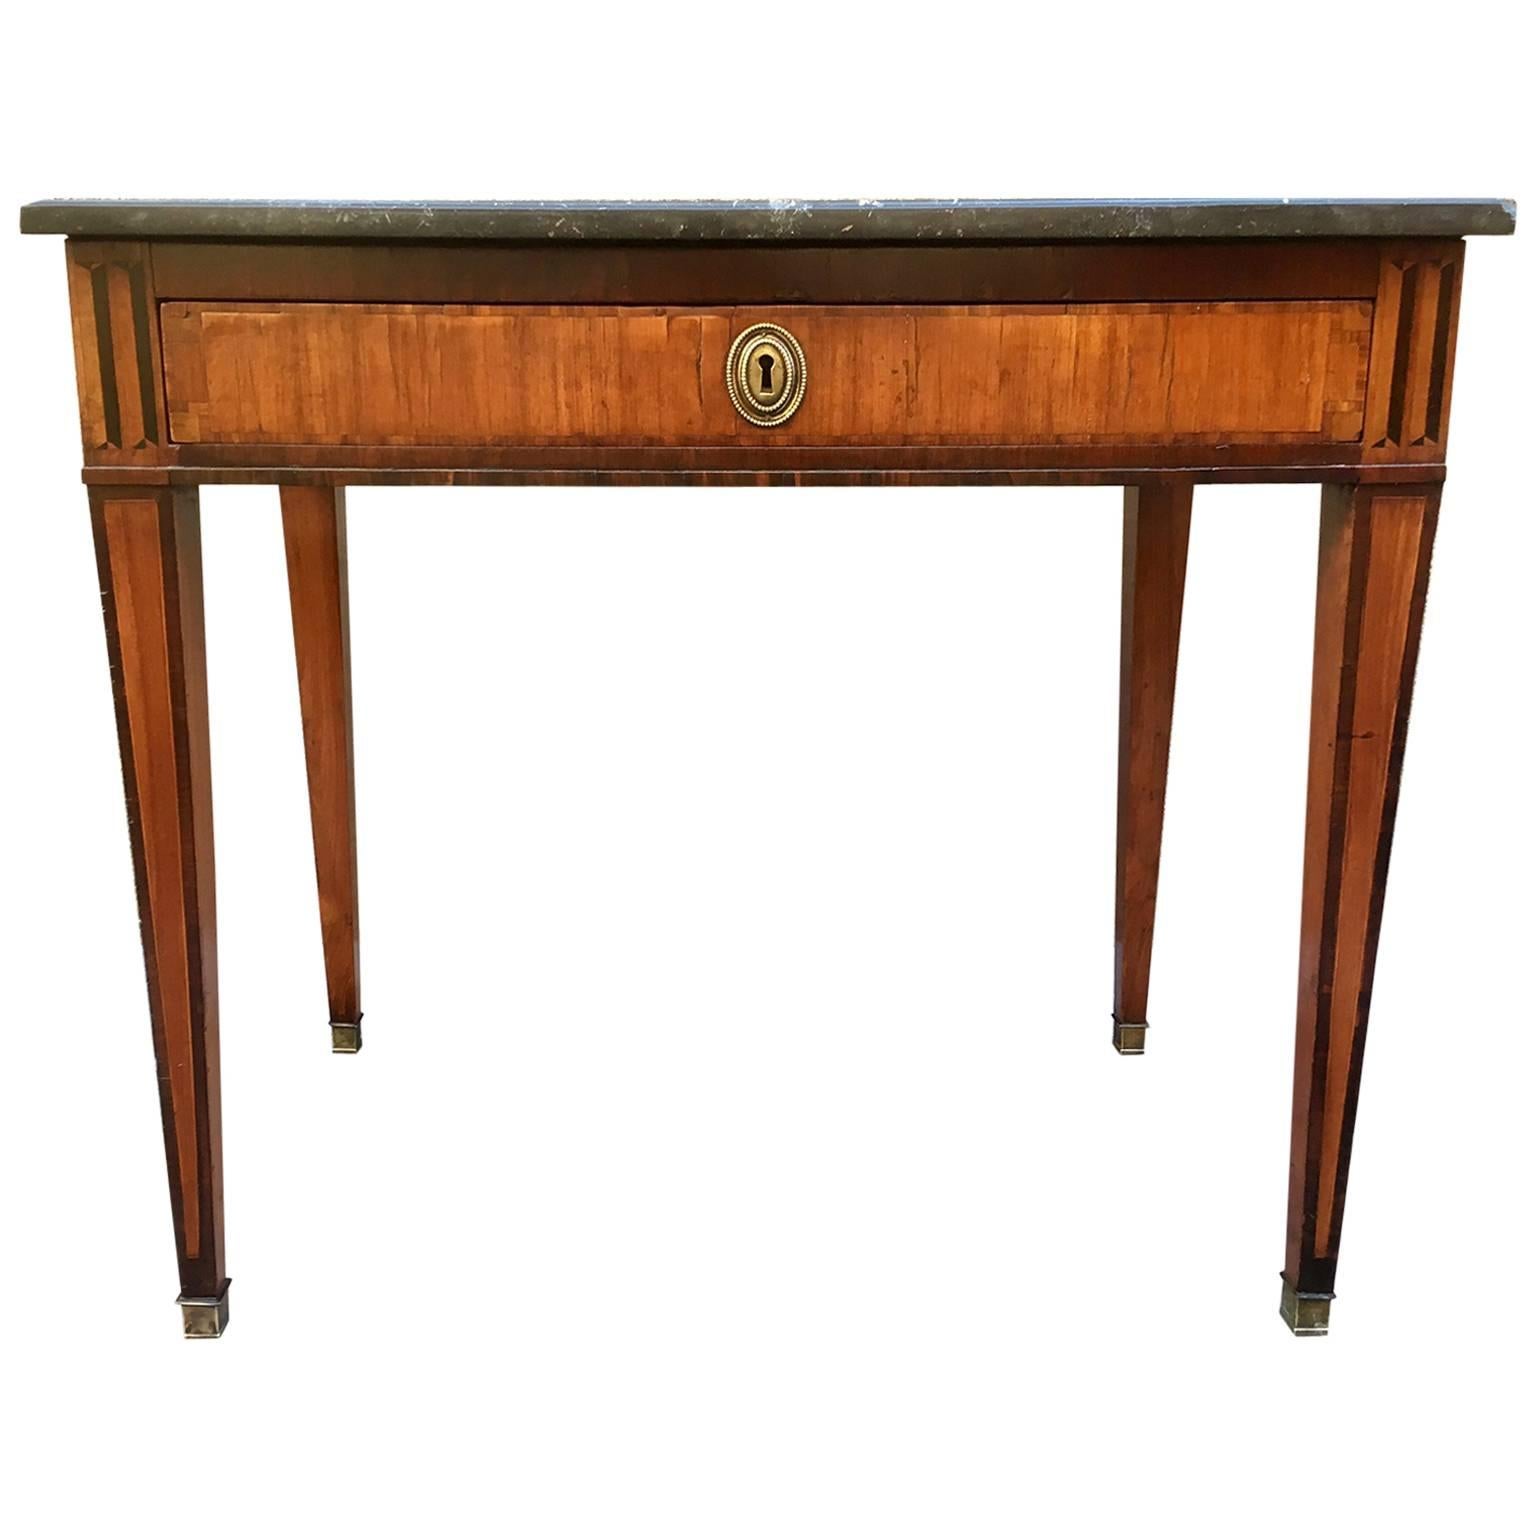 19th Century French Low Table in Louis XVI Style